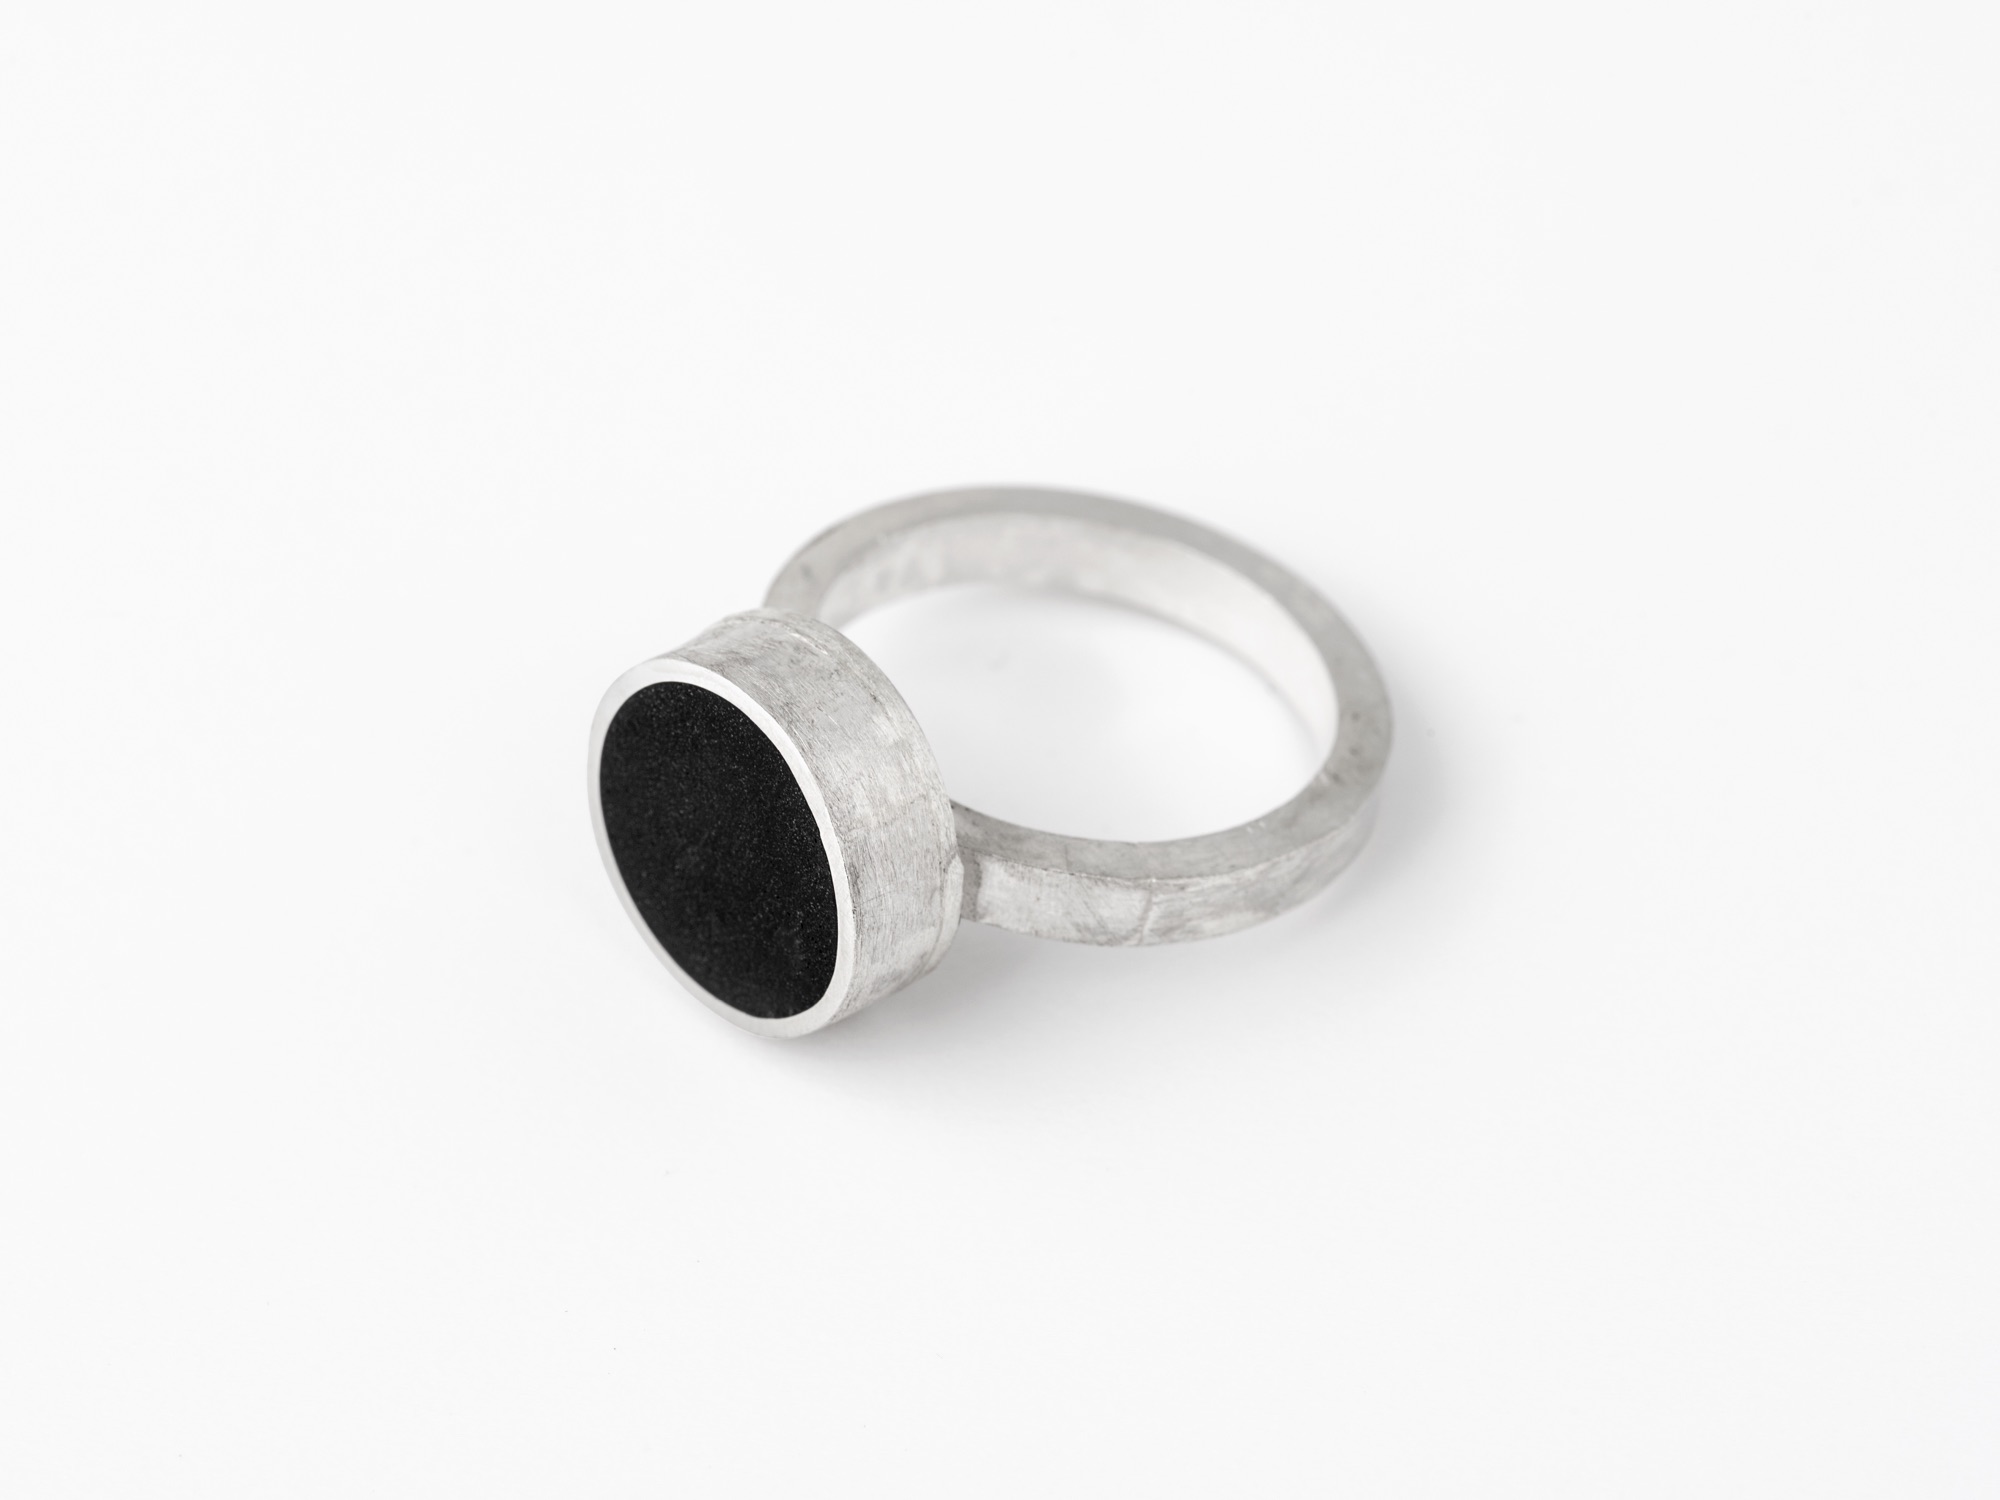 Statement black resin and silver ring by Clare Lloyd of Colour Designs Jewellery